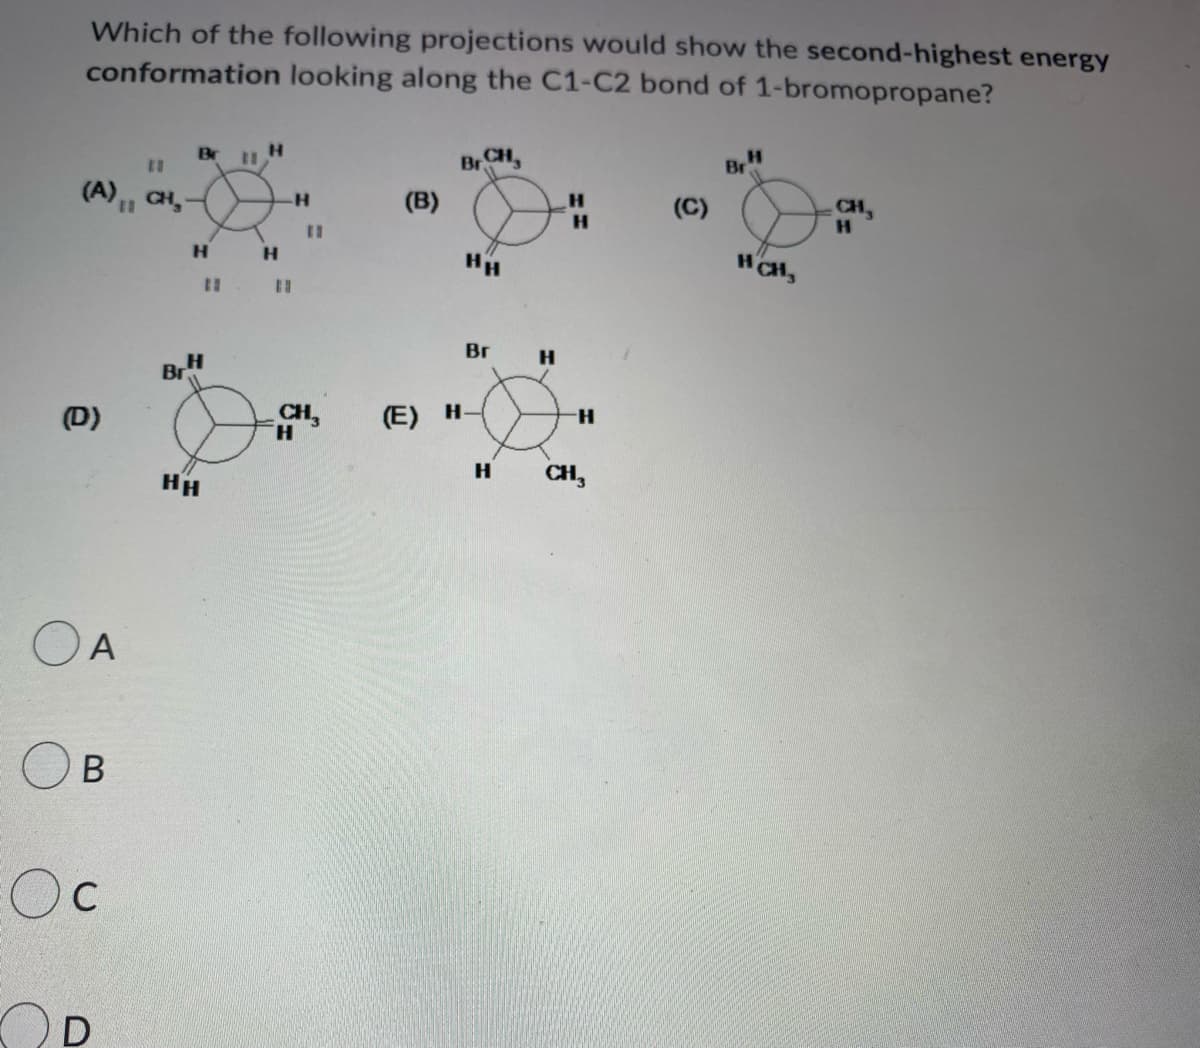 Which of the following projections would show the second-highest energy
conformation looking along the C1-C2 bond of 1-bromopropane?
11
Н
11
BRCH,
Br H
(A), CH,
(B)
(C)
Н
Н
D)
A
B
Ос
D
Н
Br
Н
HH
#
н
н
11
Н
нн
Вг
(E) H-
Н
Н
-Н
CH3
HCH₂